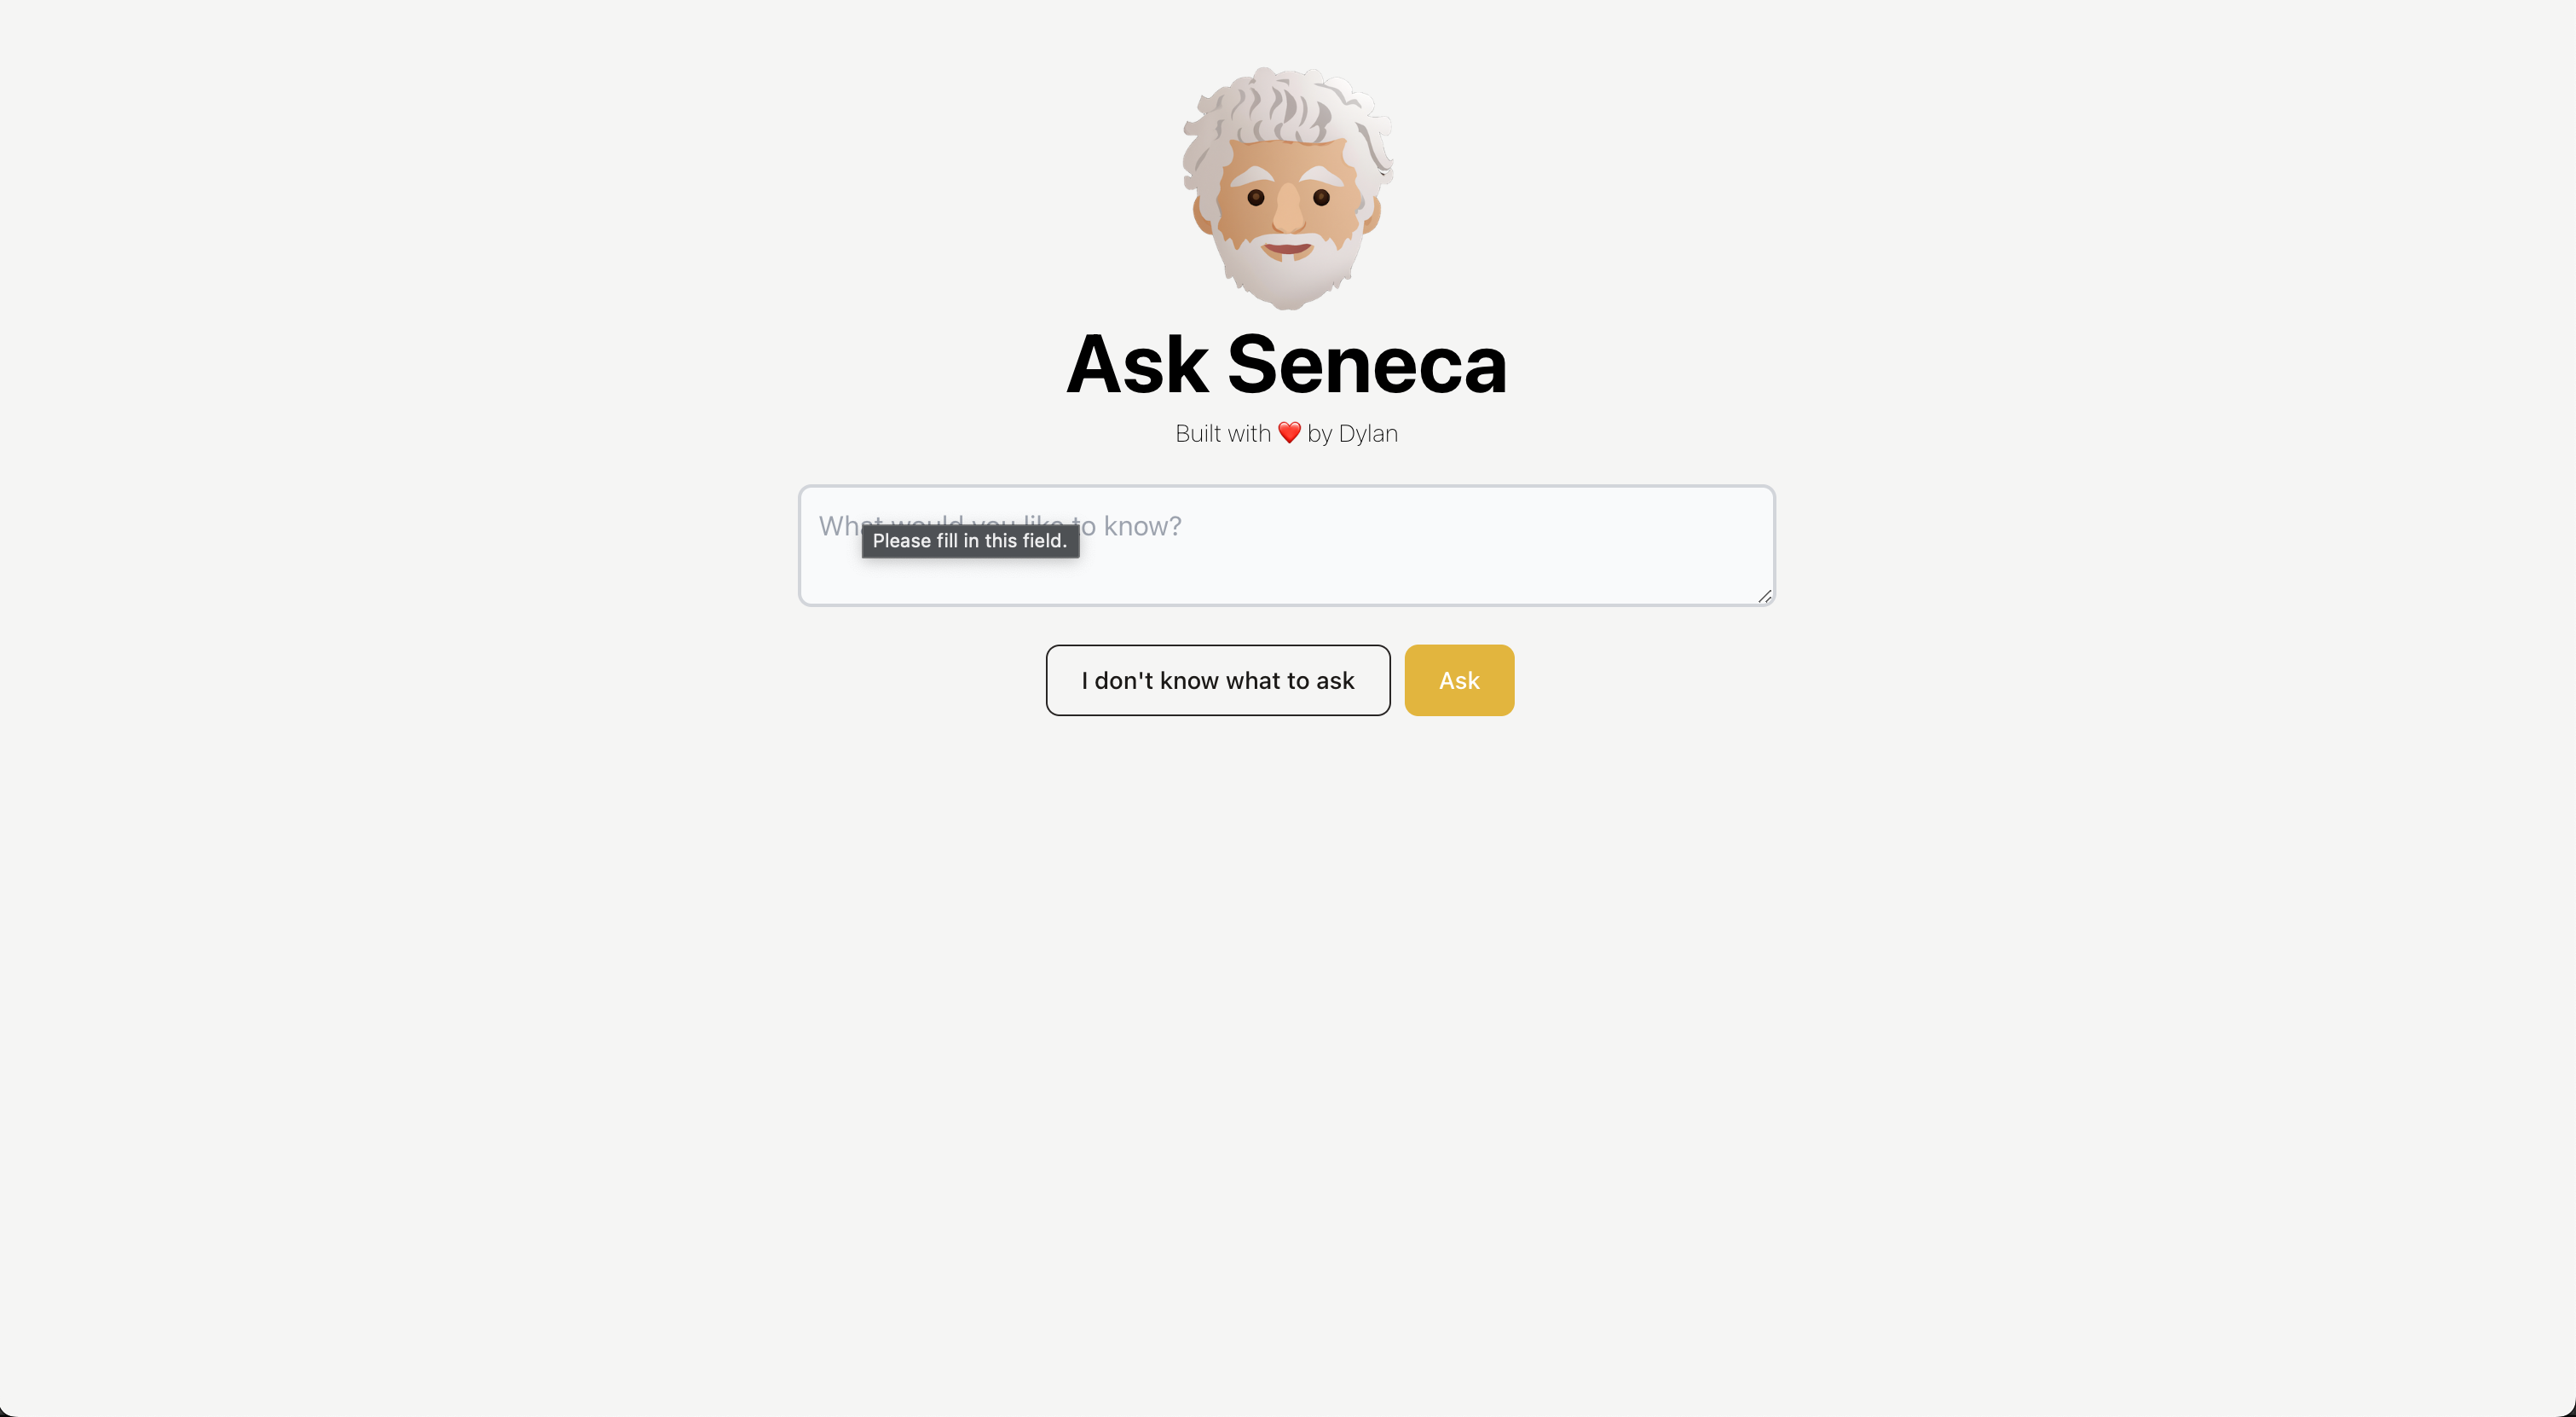 Unlock the Secrets of Stoicism with AskSeneca.com: Talk to a Virtual Philosopher and Change Your Life!